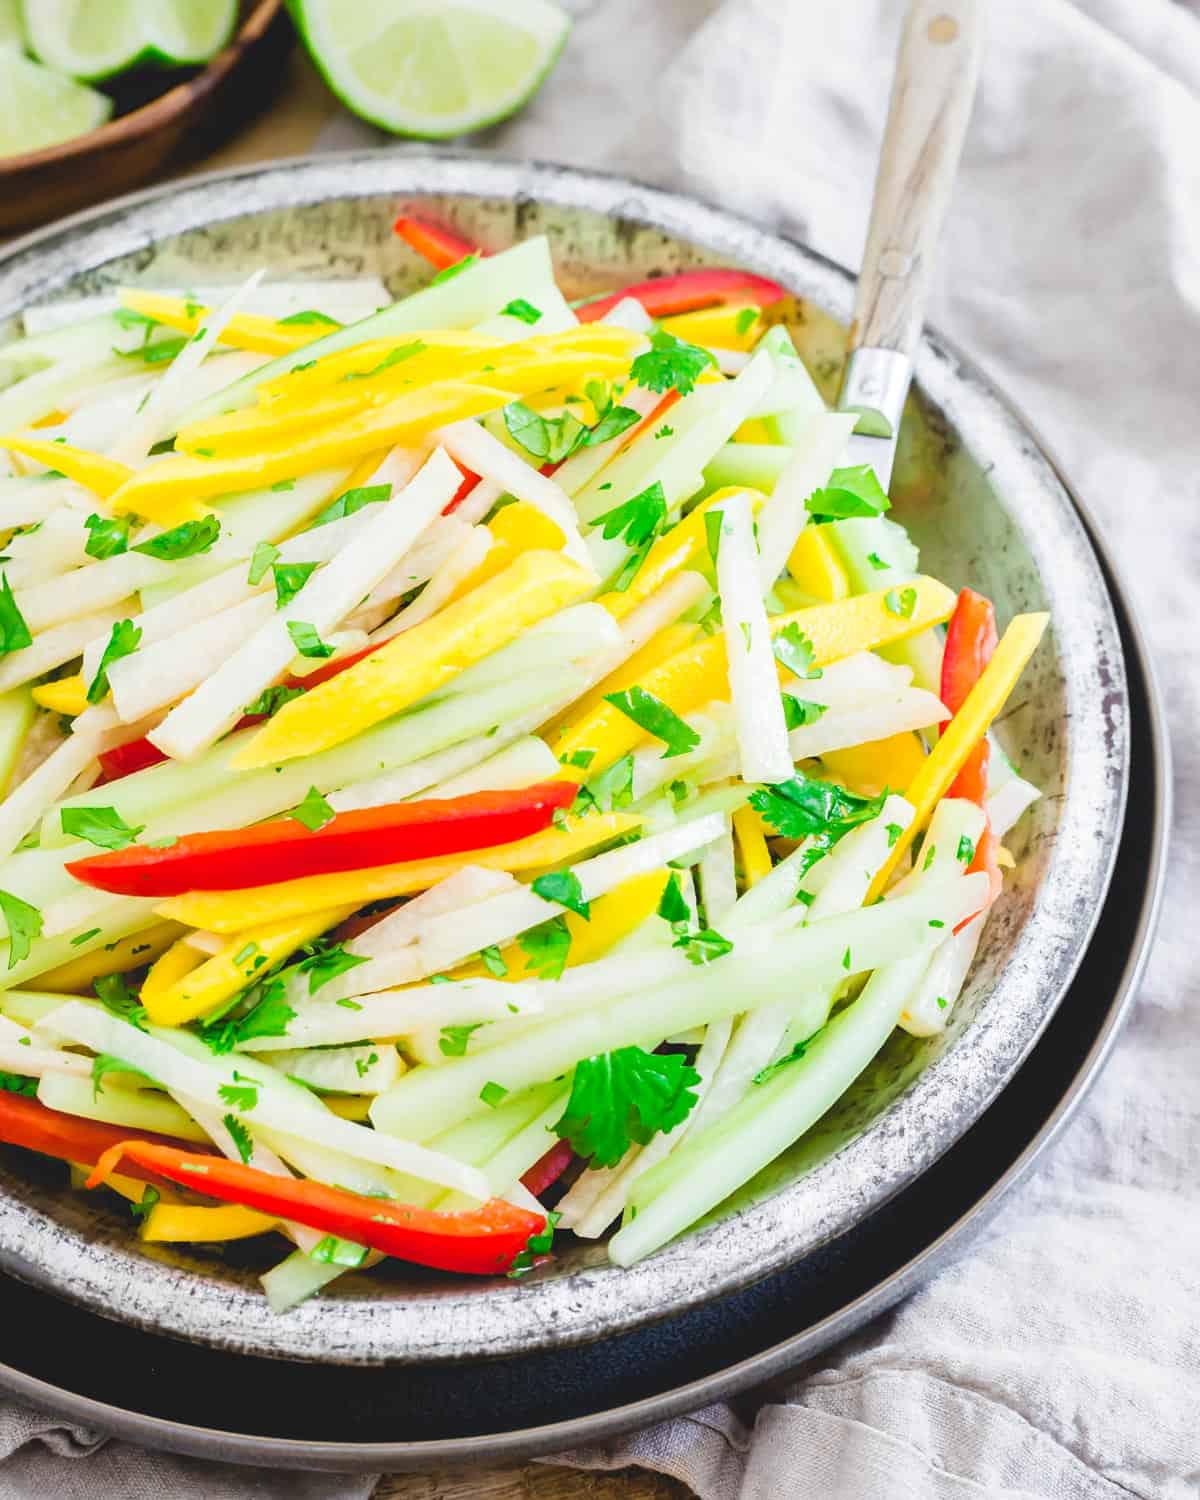 Refreshing and healthy jicama salad recipe in a metal bowl garnished with cilantro with a serving spoon.